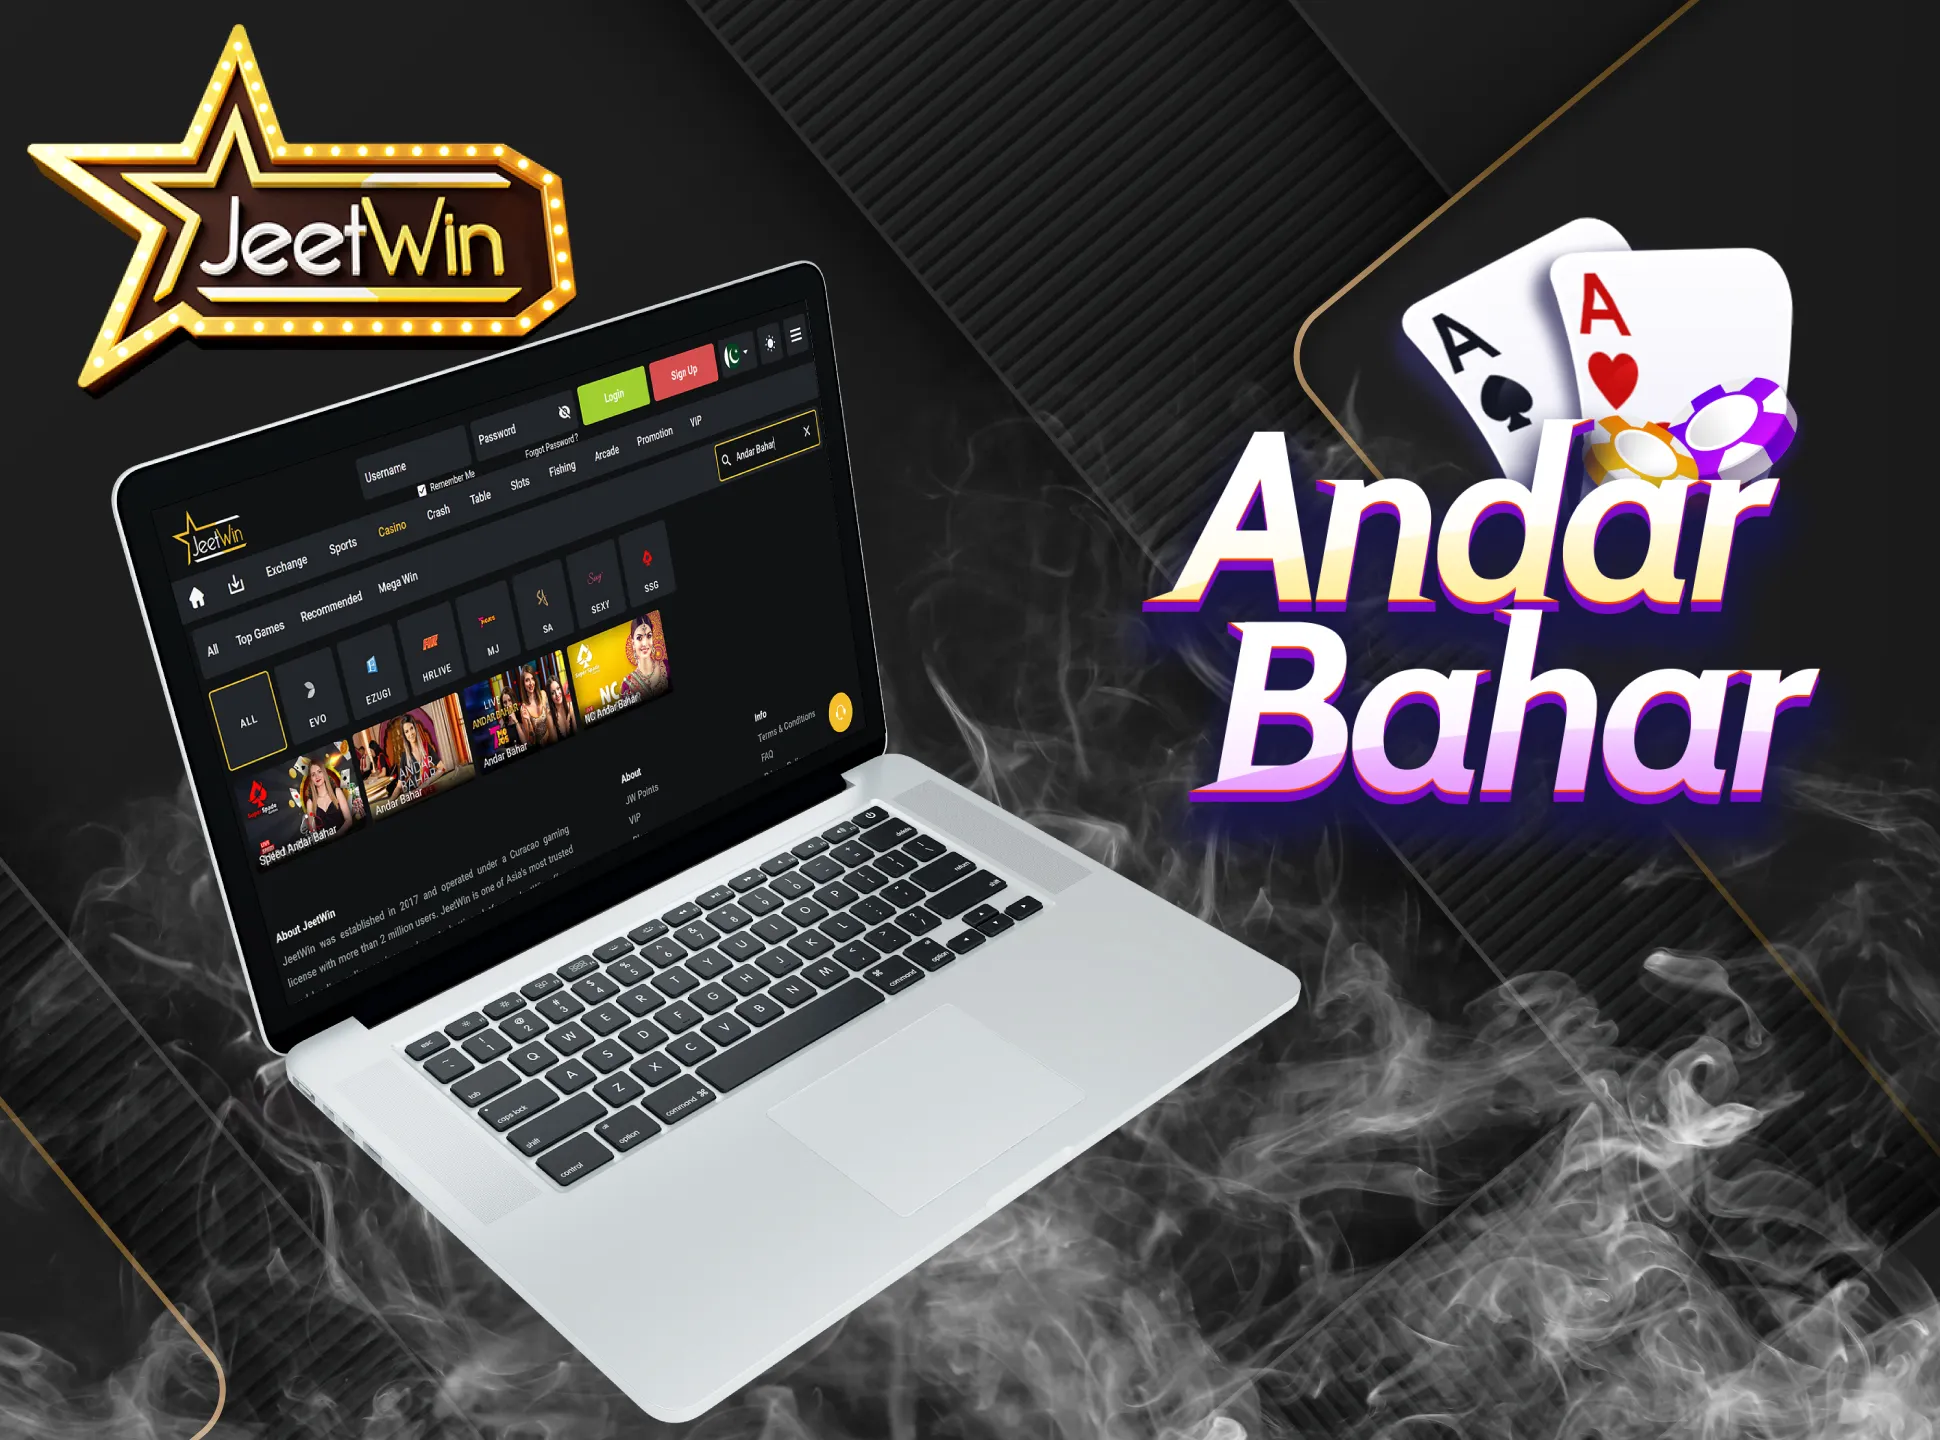 Play Andar Bahar game on JeetWin website.